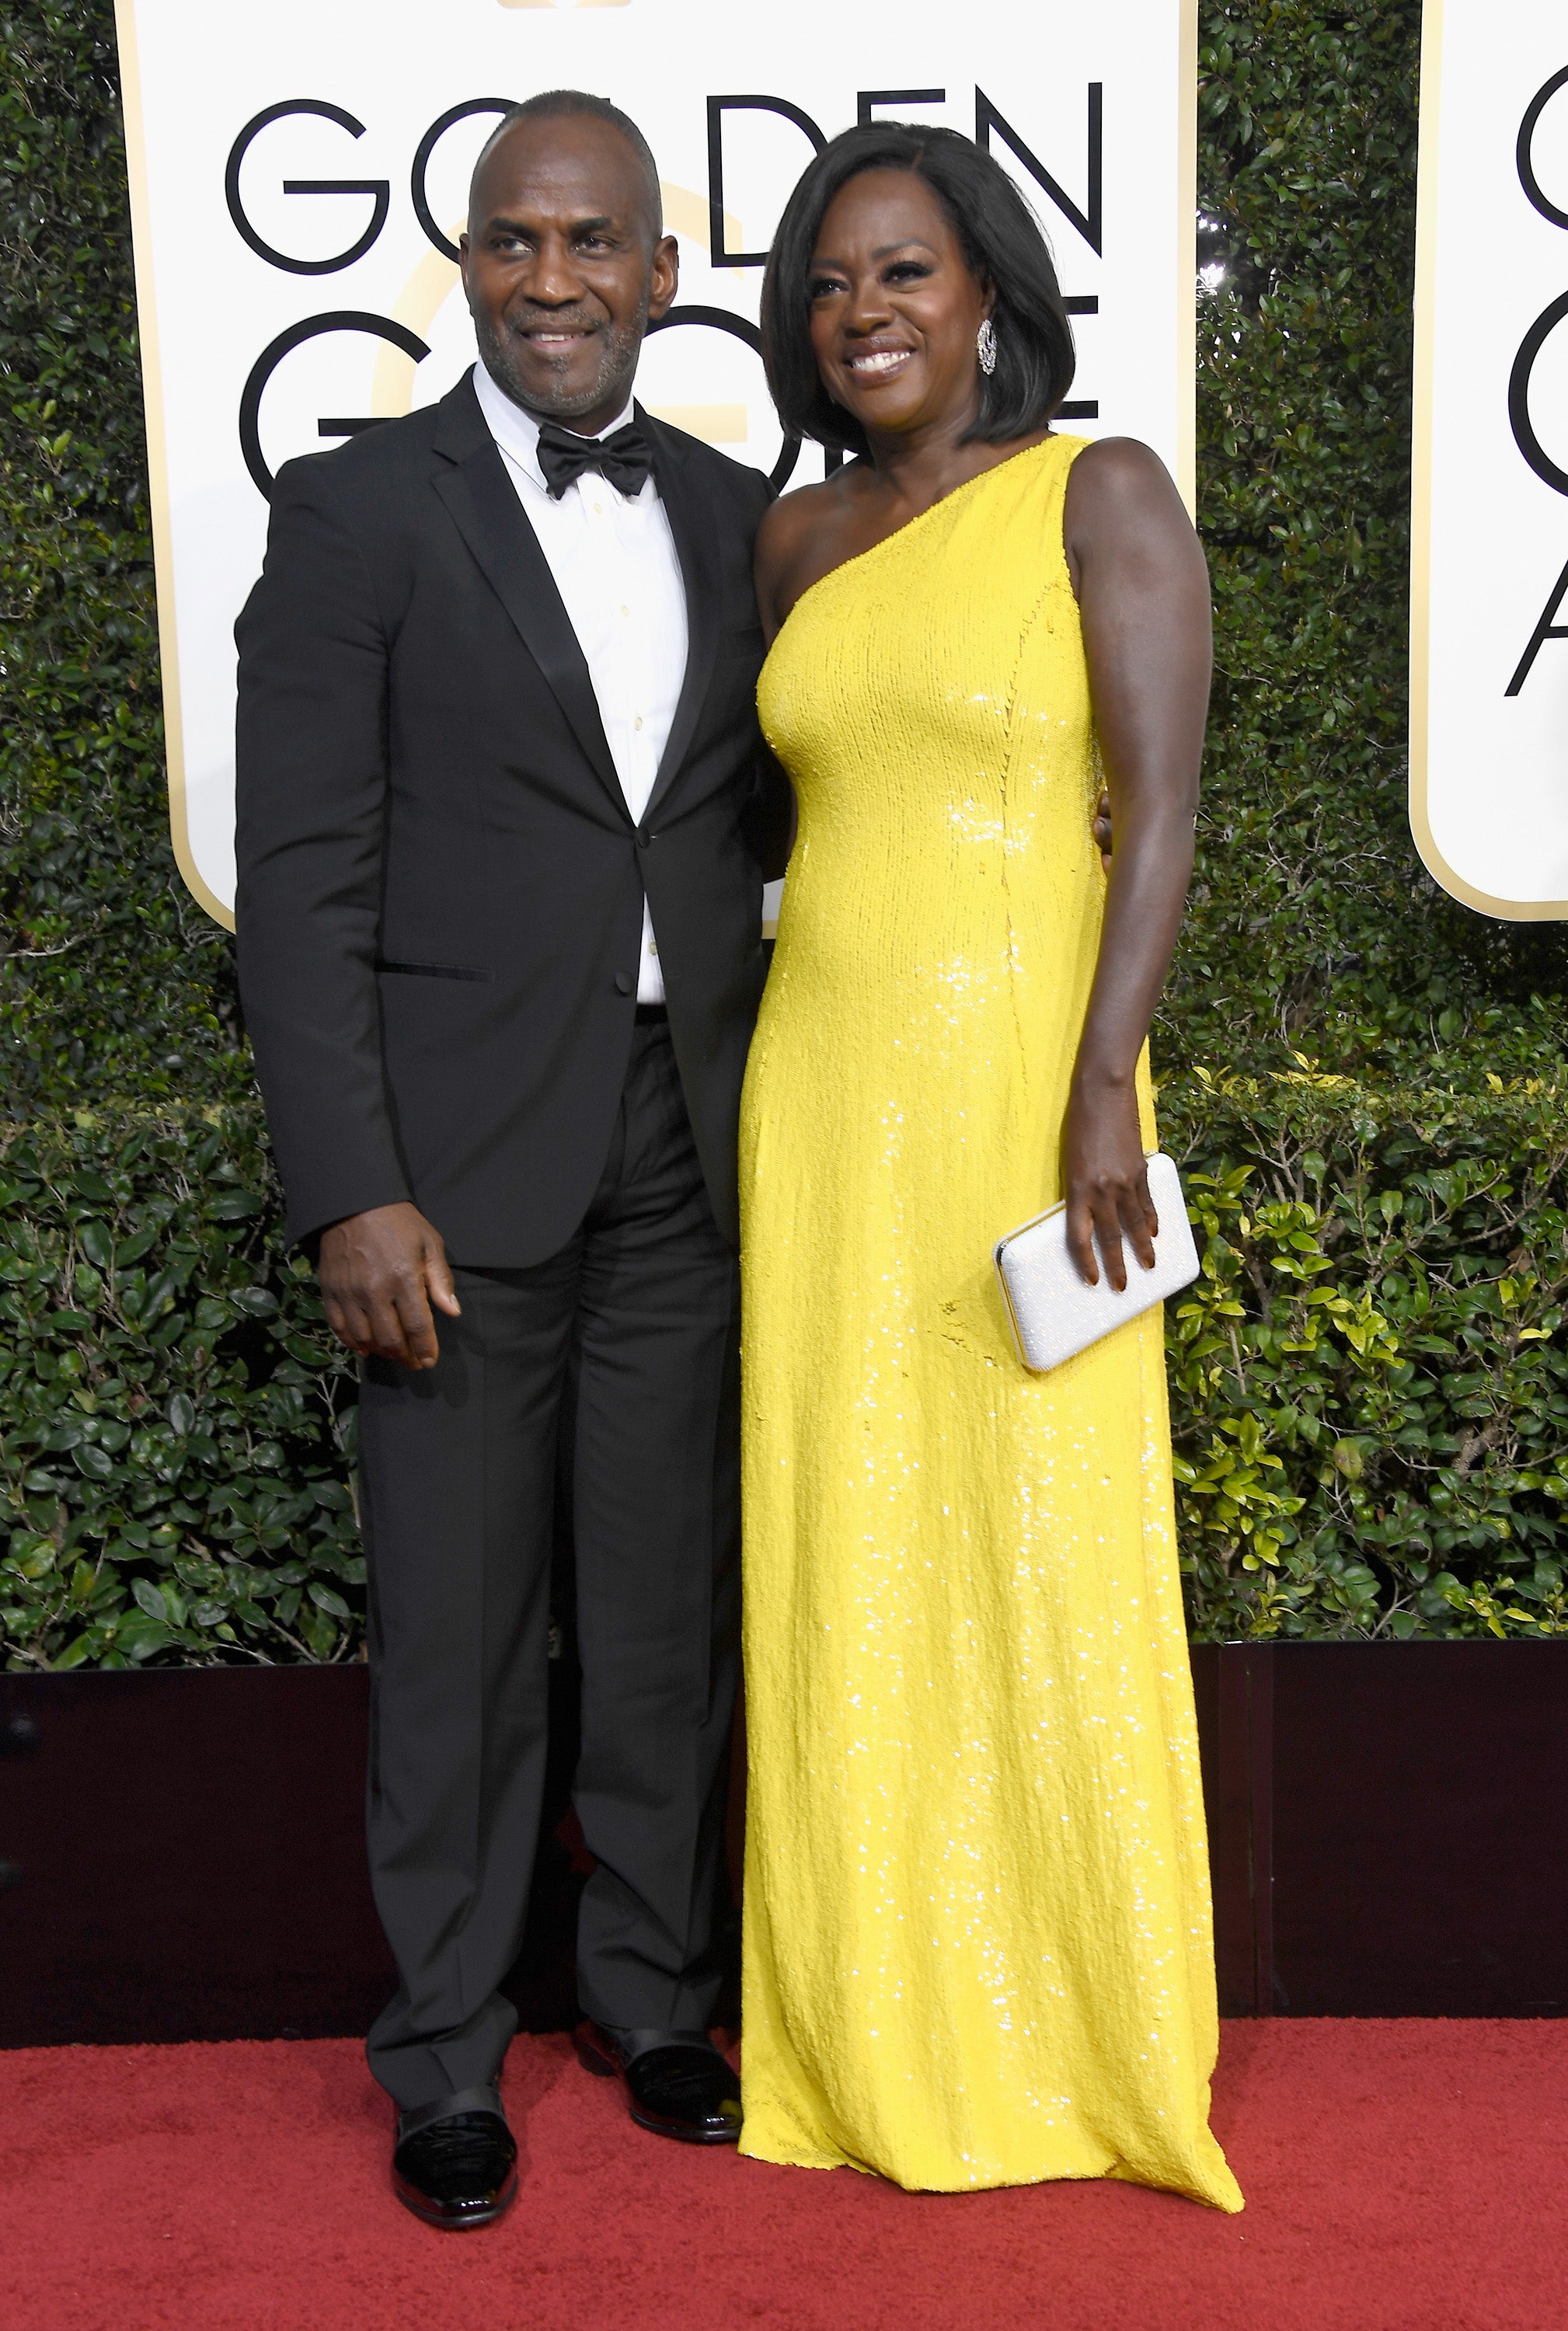 These Sweet Couples Shined At the 2017 Golden Globes